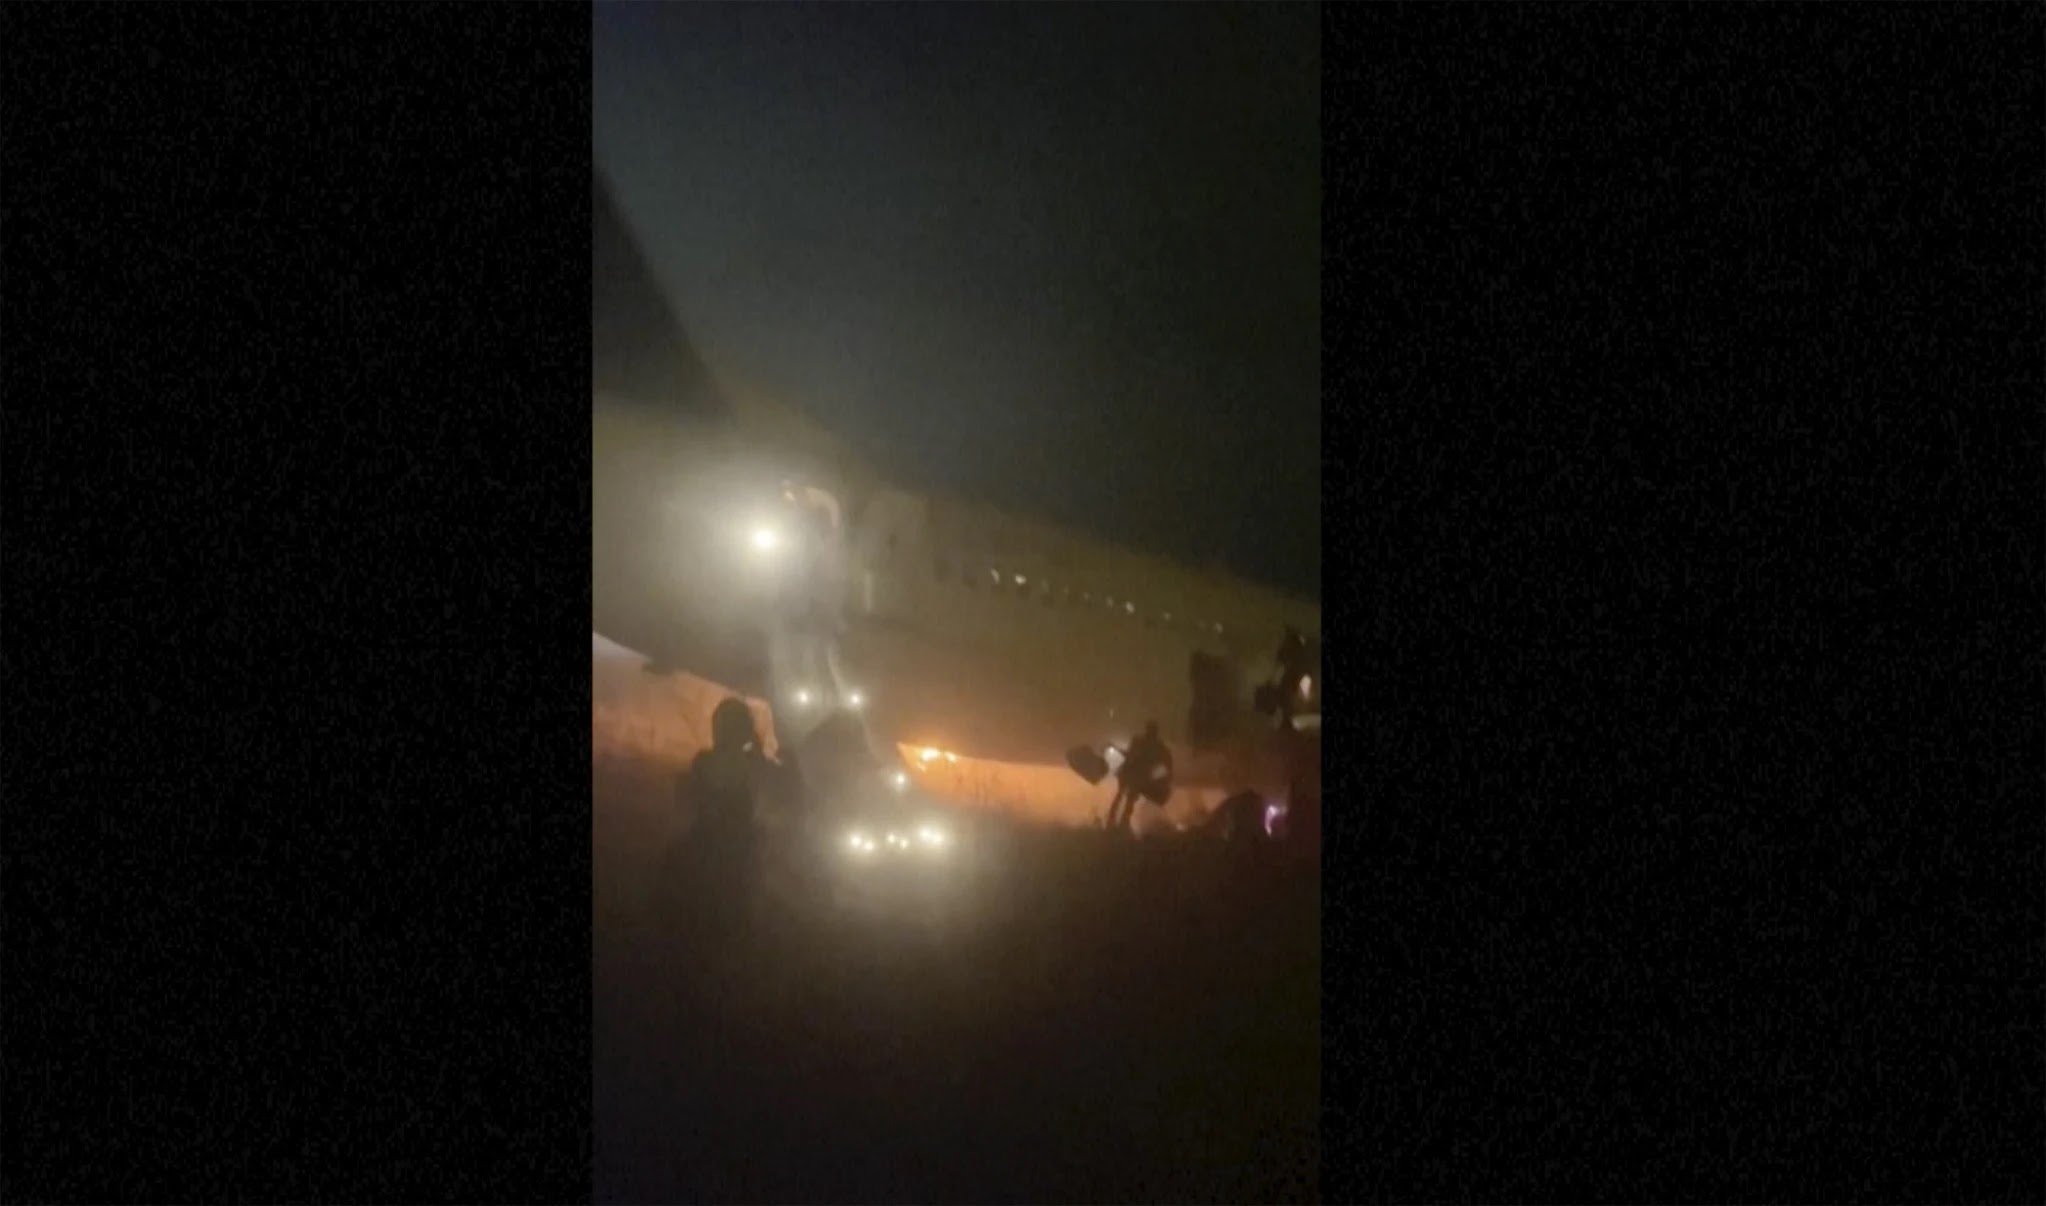 A Boeing 737-300 plane carrying 85 people skidded off a runway at the airport in Senegal’s capital, injuring 10 people